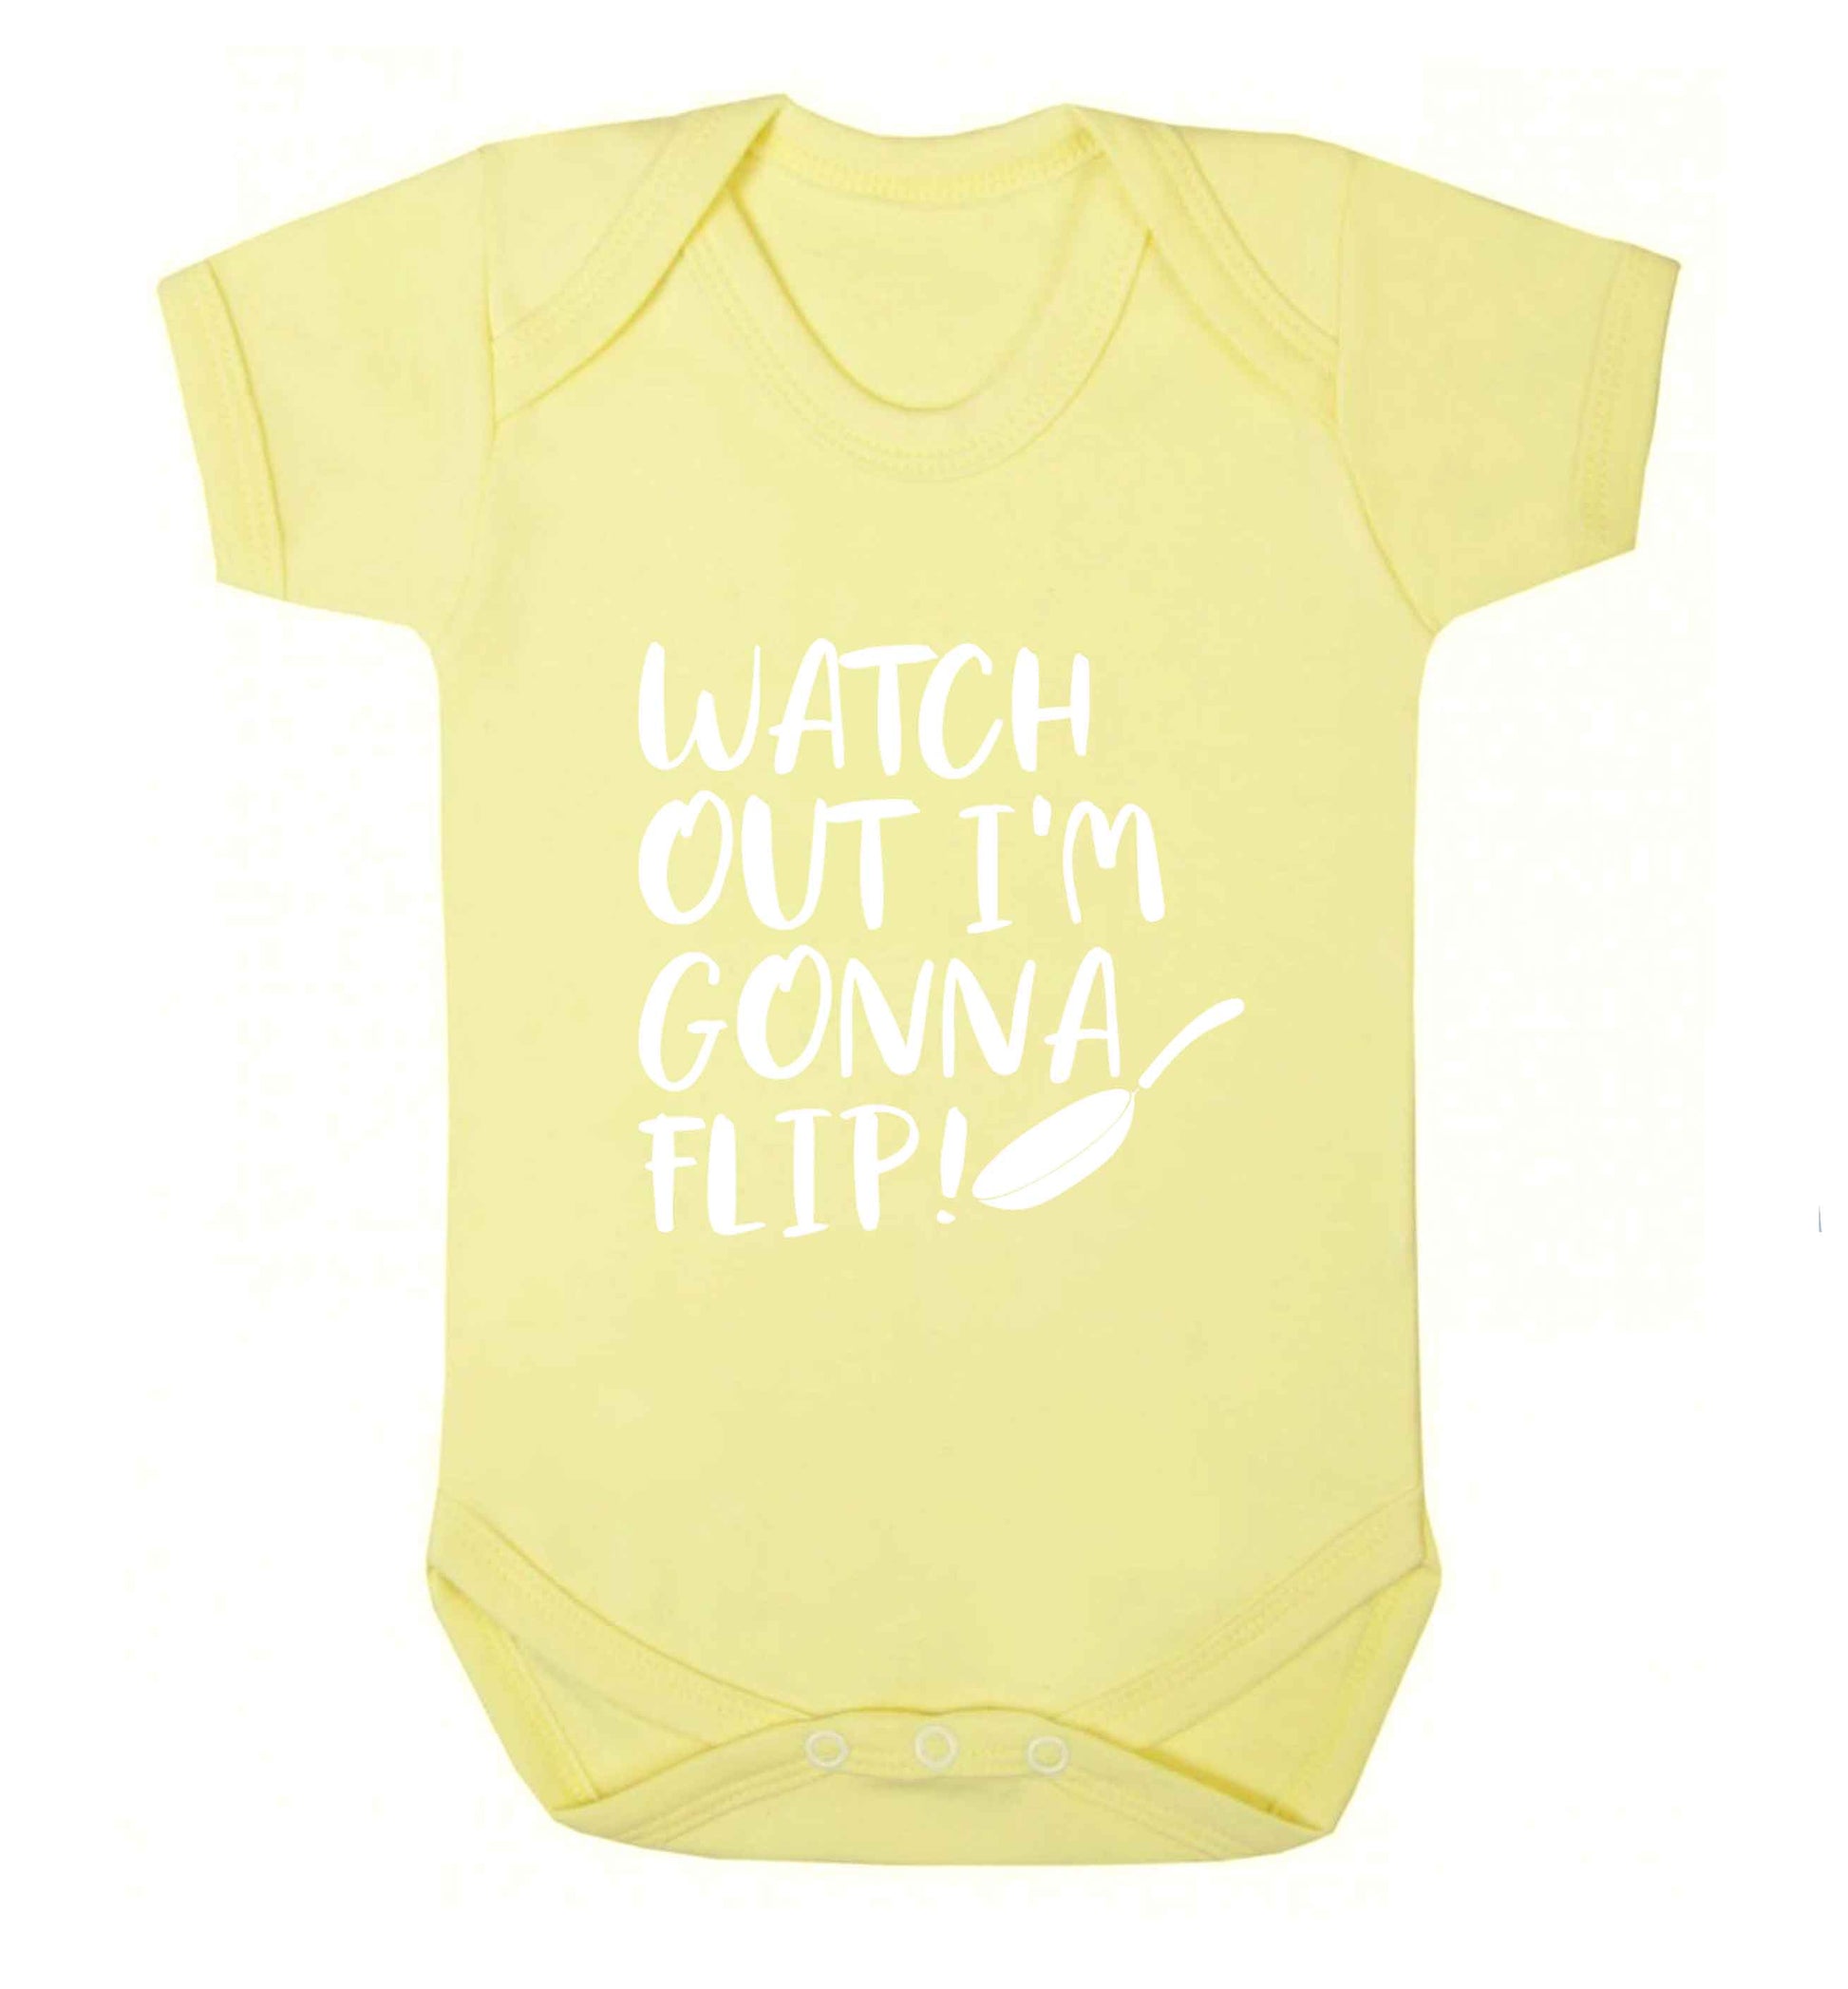 Watch out I'm gonna flip! baby vest pale yellow 18-24 months